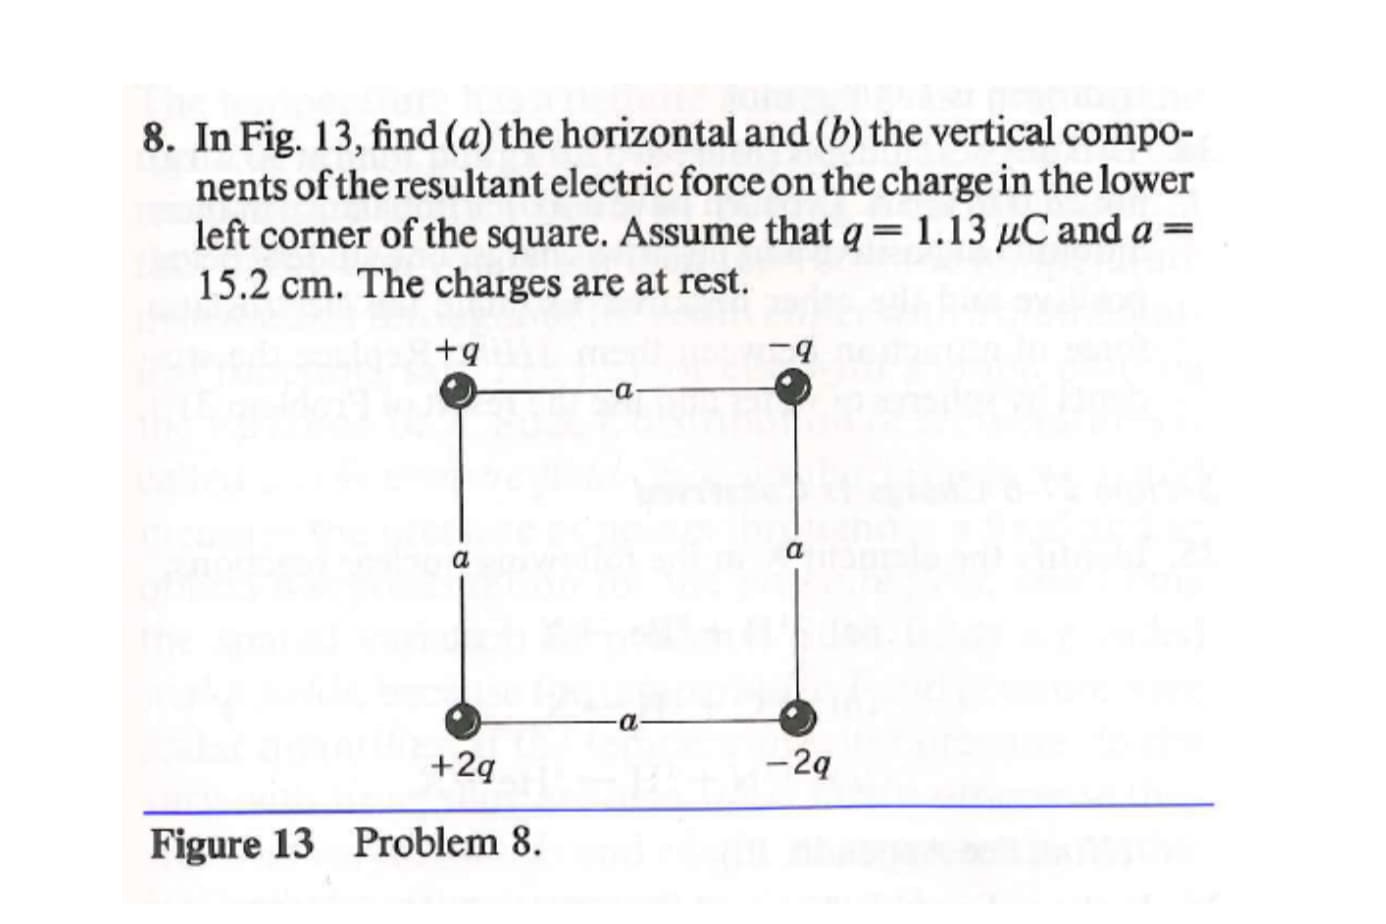 8. In Fig. 13, find (a) the horizontal and (b) the vertical compo-
nents of the resultant electric force on the charge in the lower
left corner of the square. Assume that q= 1.13 µC and a =
15.2 cm. The charges are at rest.
+9
a.
-a
-2ą
+2q
Figure 13 Problem 8.
